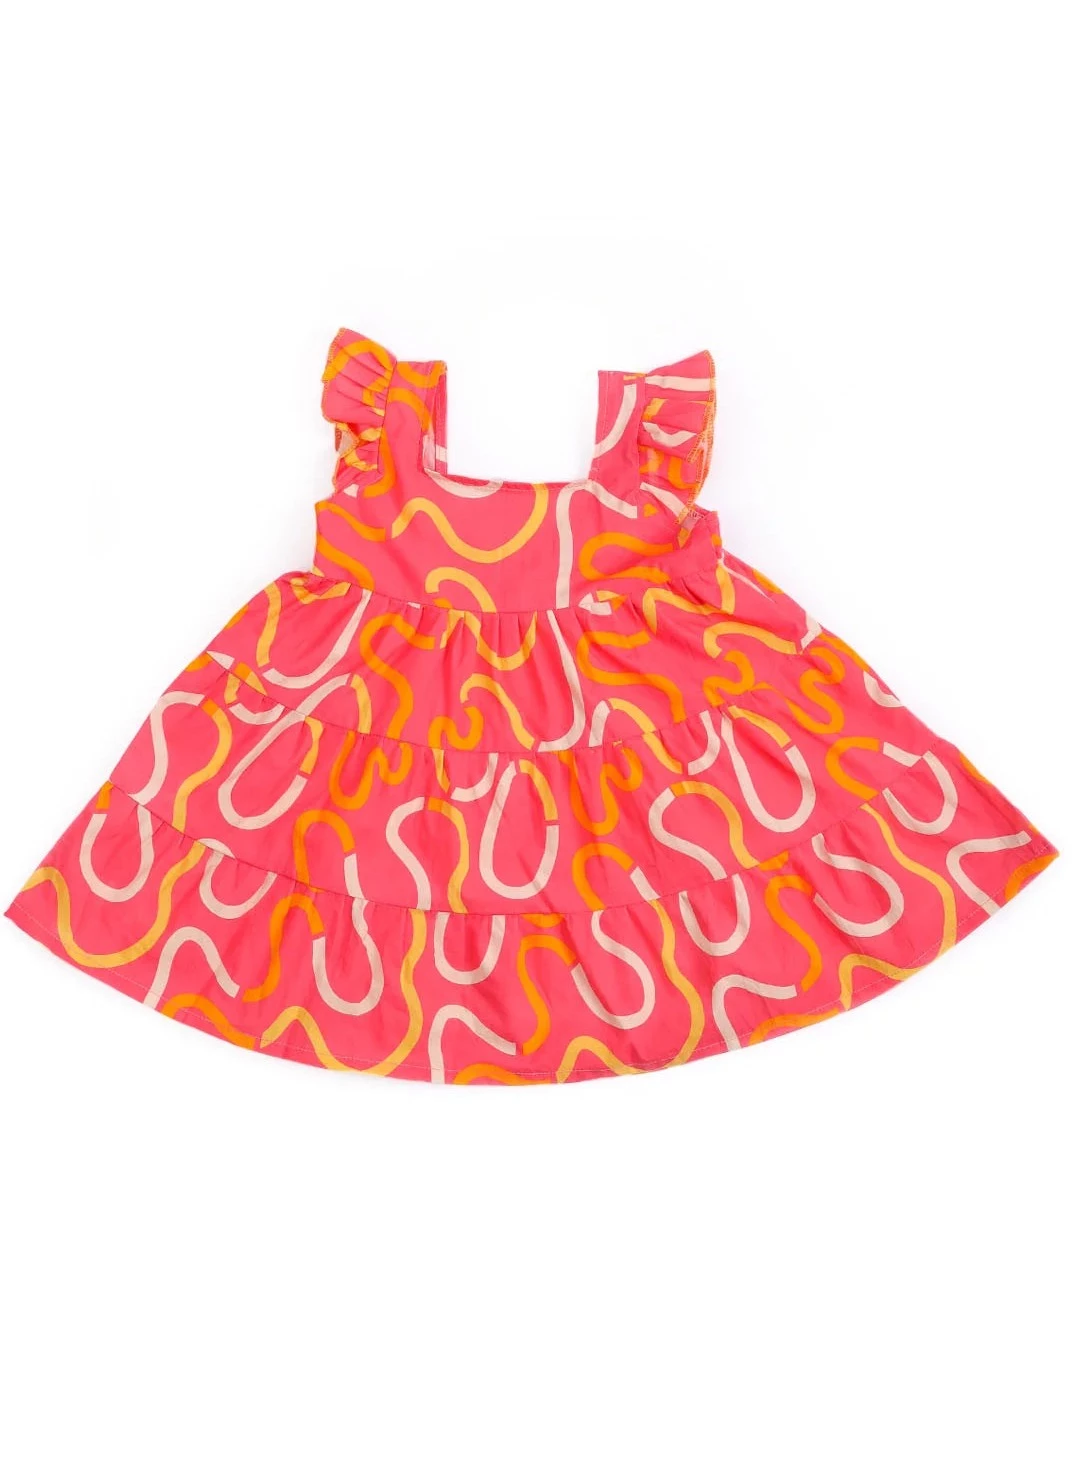 MIKO LOLO Daffy Tiered Frock in Organic Cotton | kids Fashion | The Green Collective SG